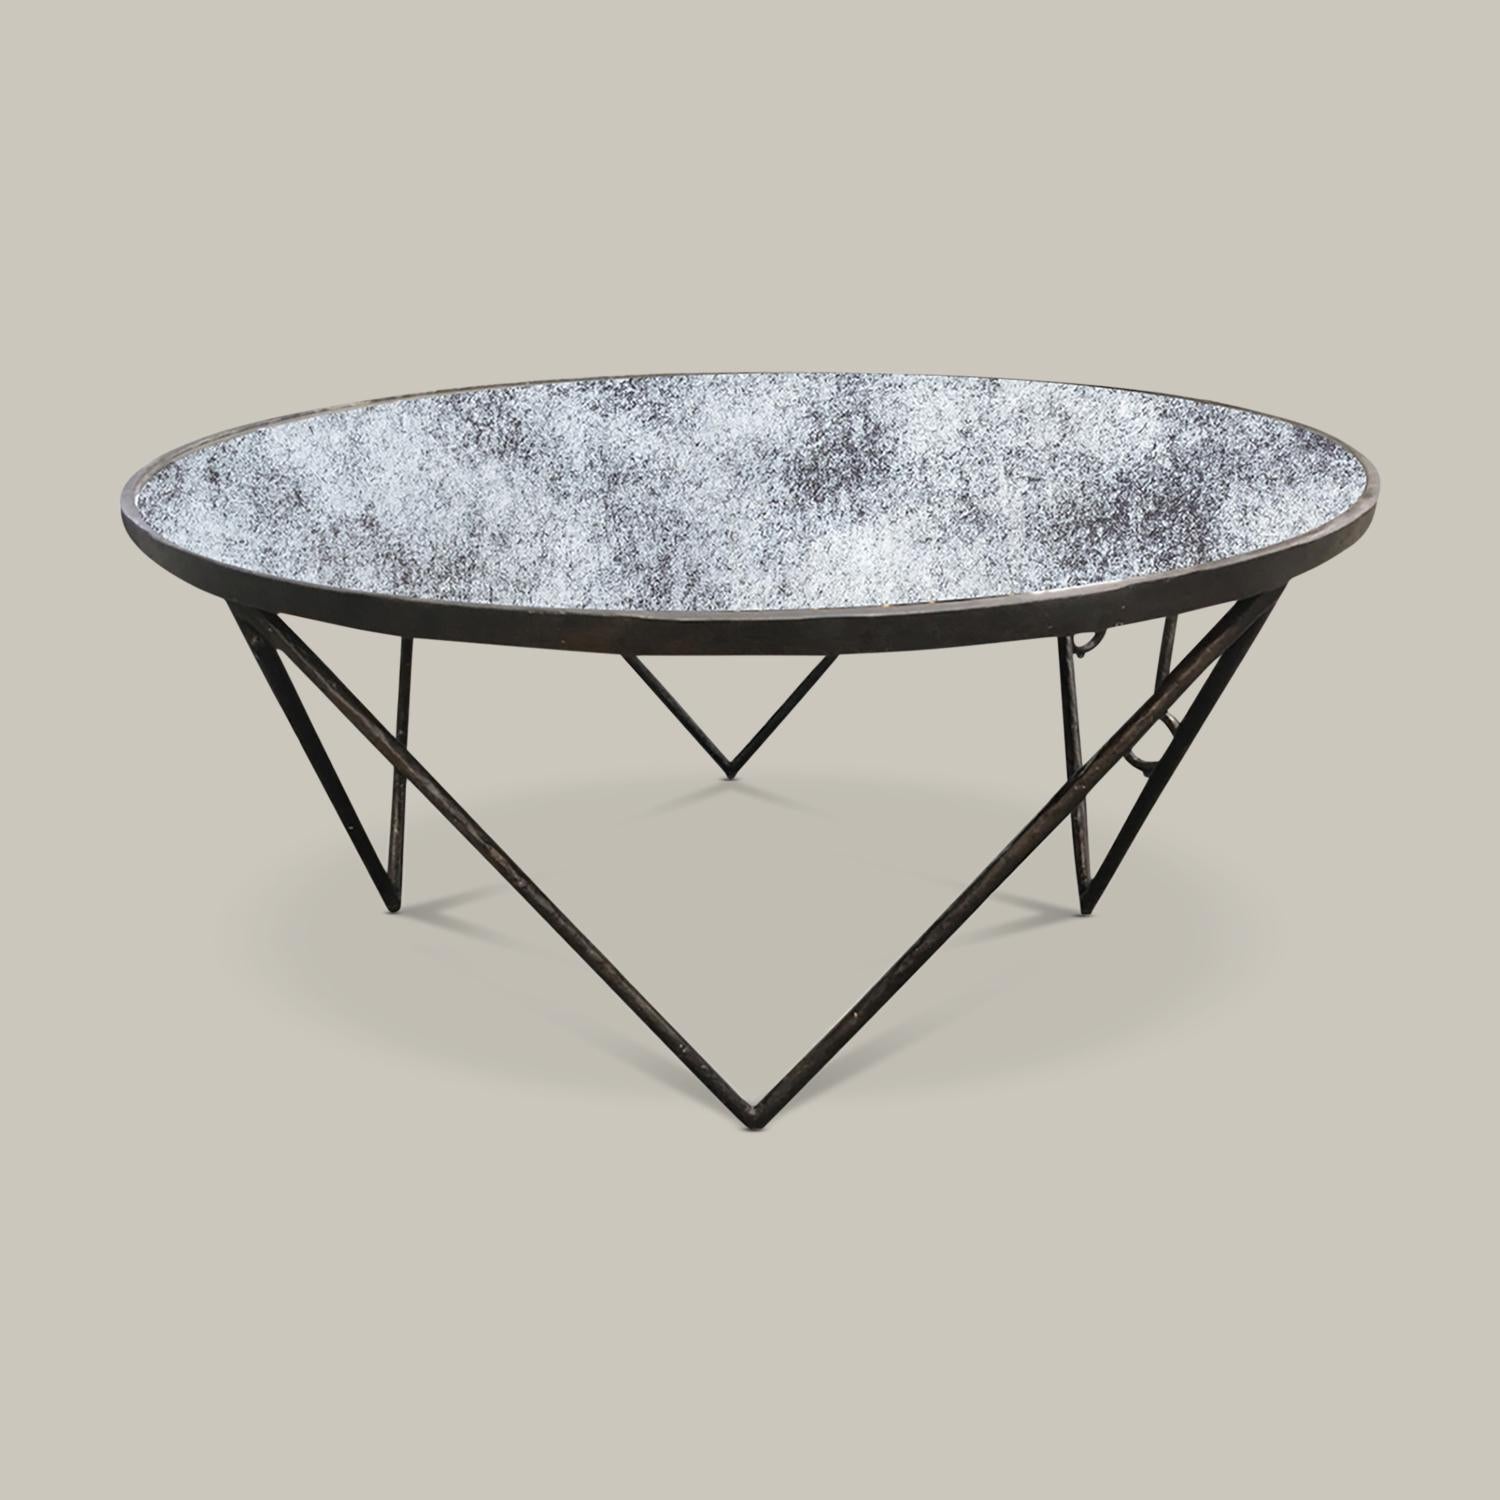 This striking, round cocktail table brings dimension to a room with its reflective top made of antique mirror and an angular, architectural steel base. Handmade by artisans in Vietnam, this piece is a gorgeous addition to a modern living space.